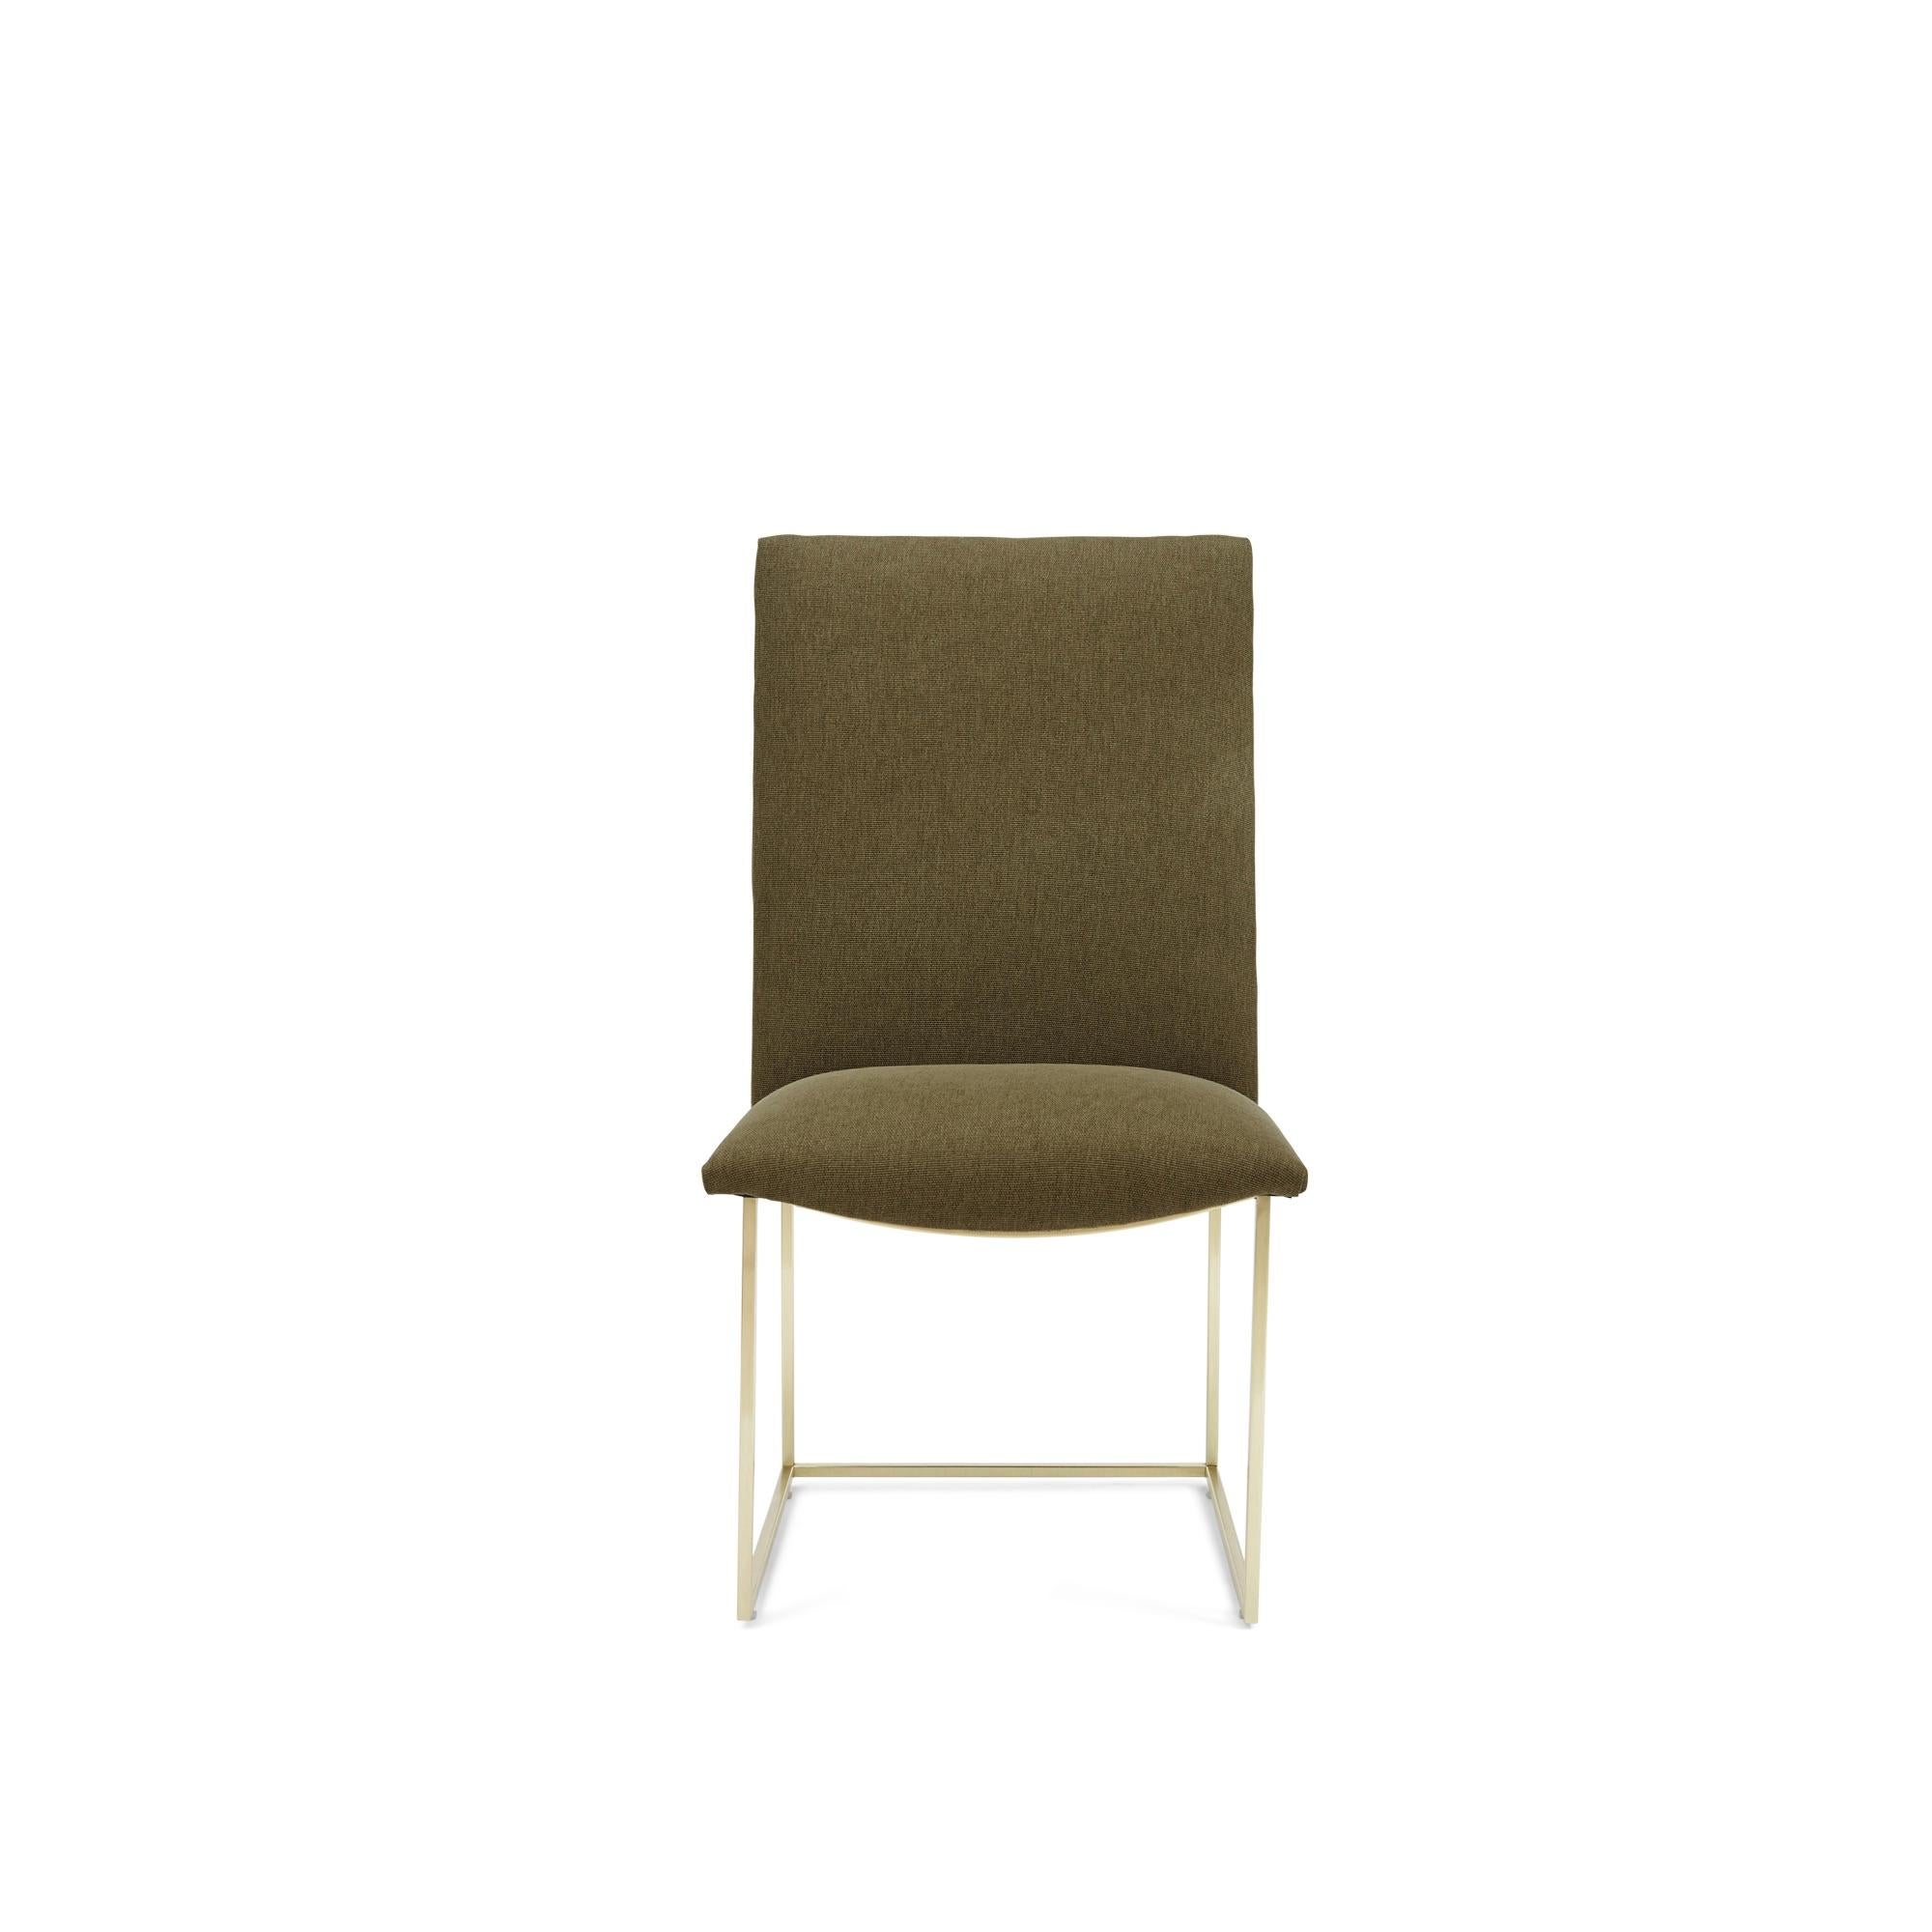 The thin frame dining chair features a high back and an armless silhouette that rest atop a thin metal base. Shown here with a satin brass base.

The Lawson-Fenning collection is designed and handmade in Los Angeles, California.

Can be made to